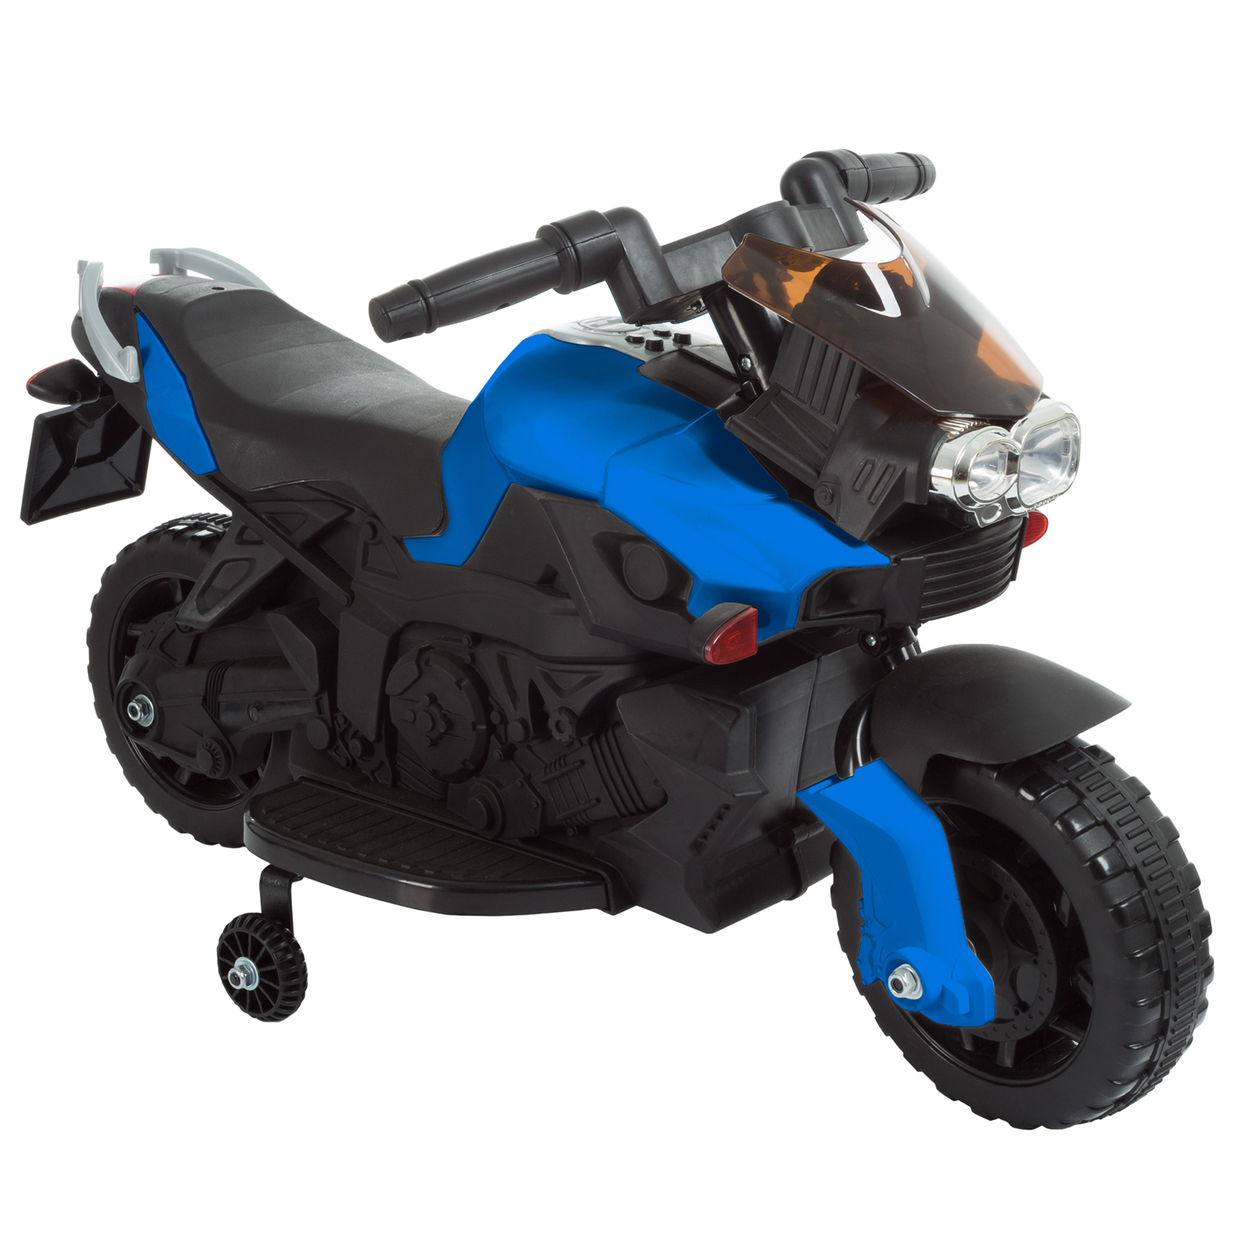 Kids Motorcycle Electric Ride-On With Training Wheels Reverse Function, Blue